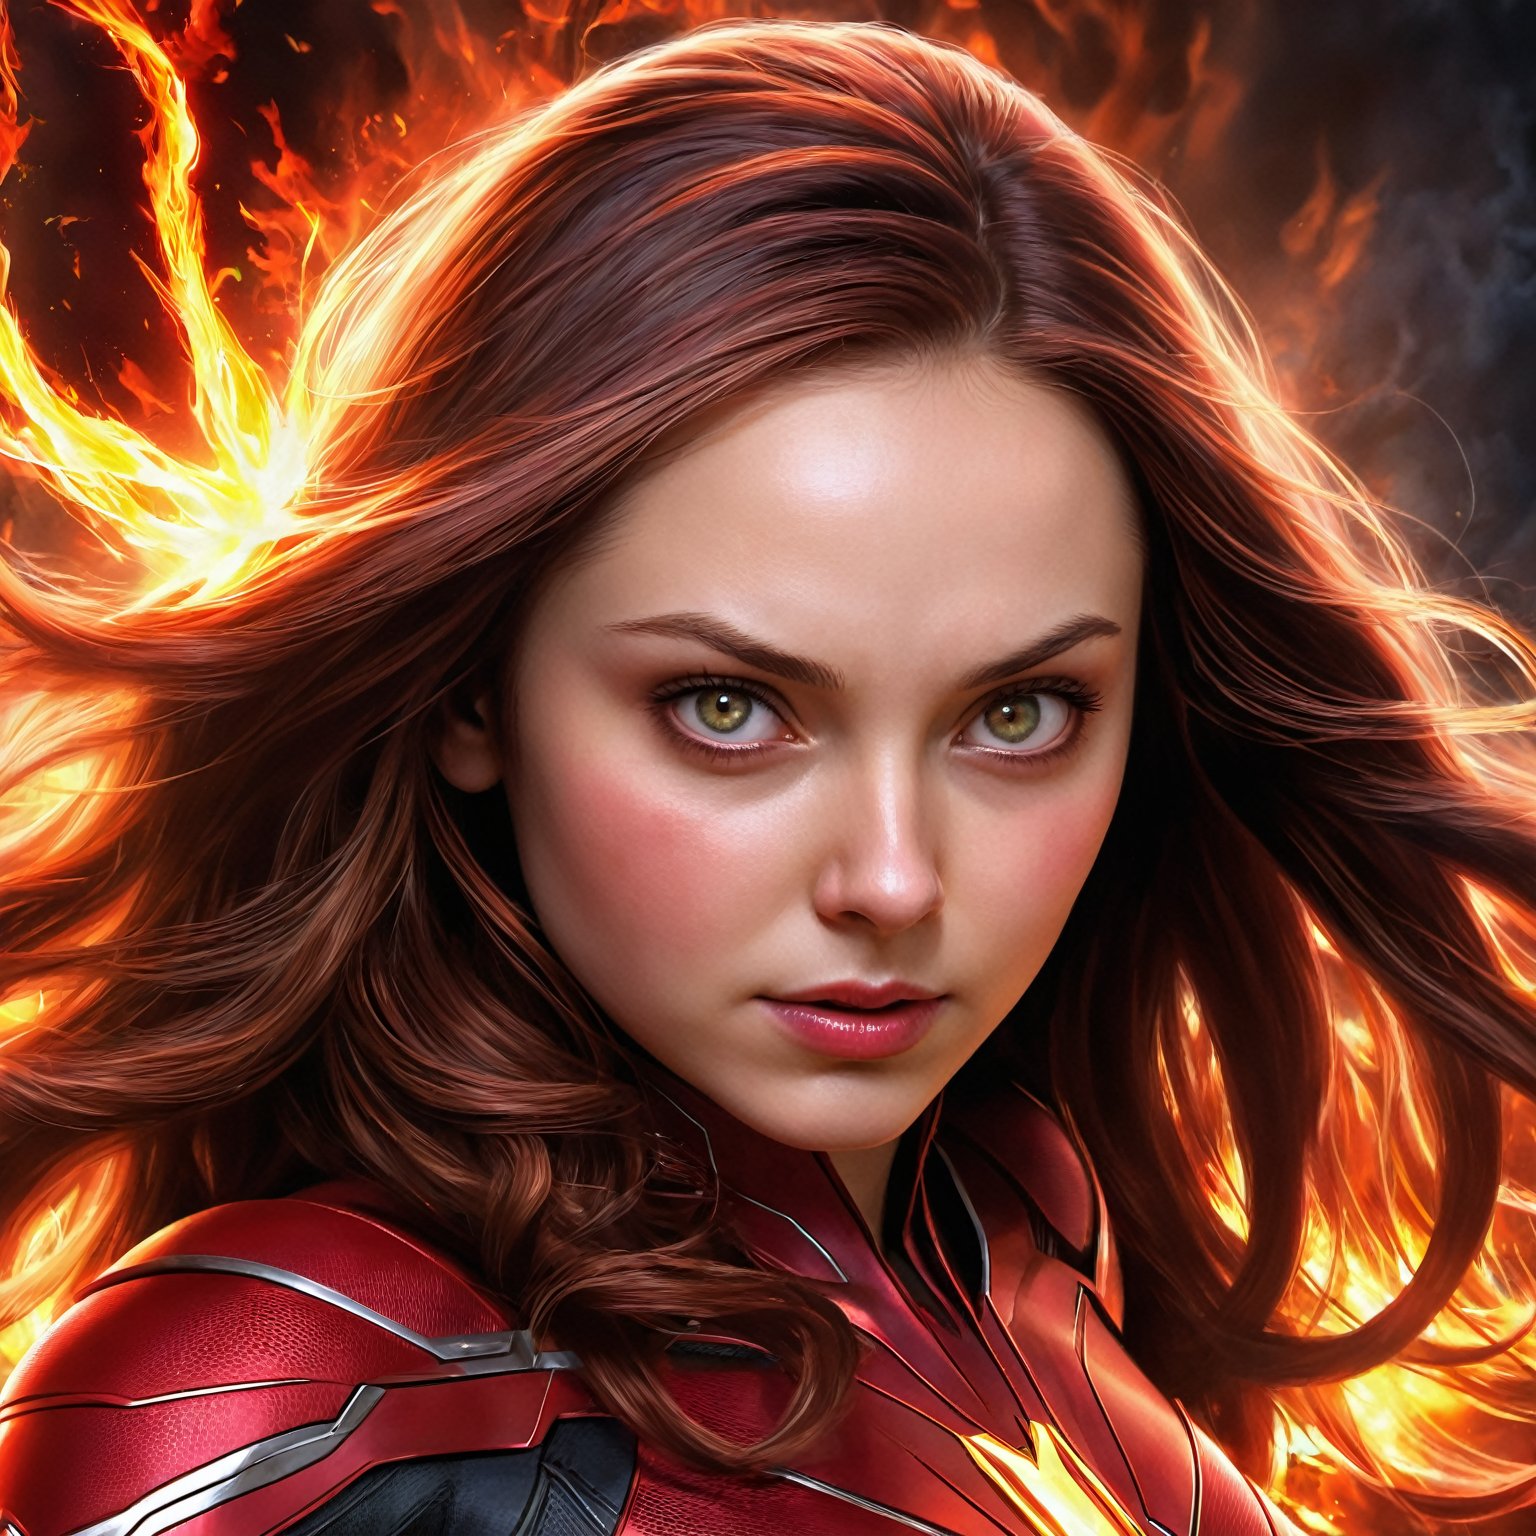 (masterpiece, top quality, best quality, beautiful and aesthetic:1.2), (1girl Wanda Maximoff the scarlet witch of Marvel:1.2), fire fairy, cute, light eyes, beautiful face, extreme detailed, (abstract:1.4, fractal art :1.3), (hair in motion :1.1), colorful, highest detailed, lightning, flying flames, ability to manipulate fire, (splash_art:1.2),Enhanced Reality